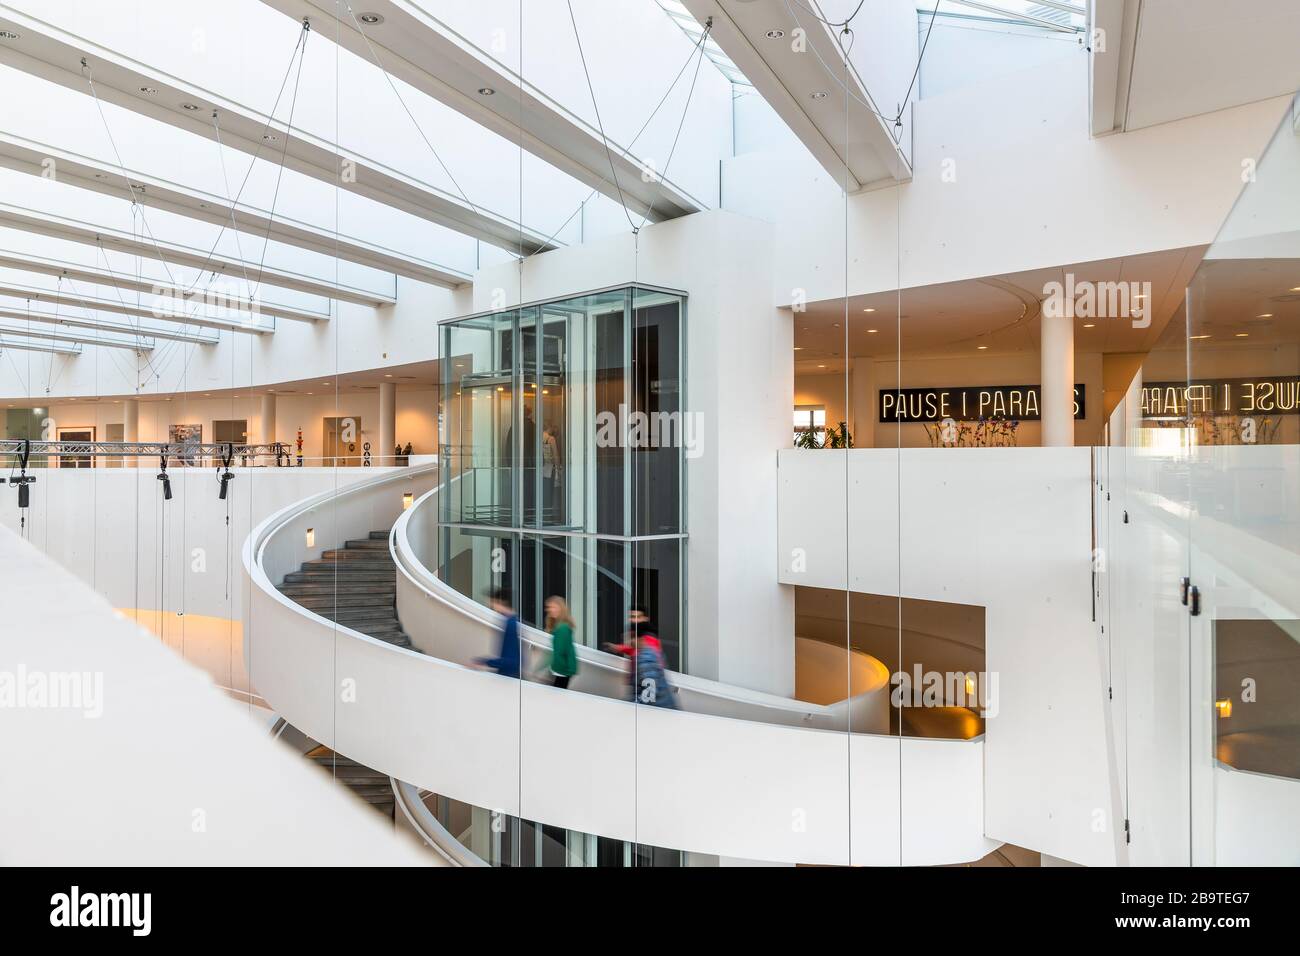 Inside the ARoS art gallery in Aarhus, Denmark. Designed by architects Schmidt Hammer Lassen. Galleries are accessed via a central spiral staircase. Stock Photo